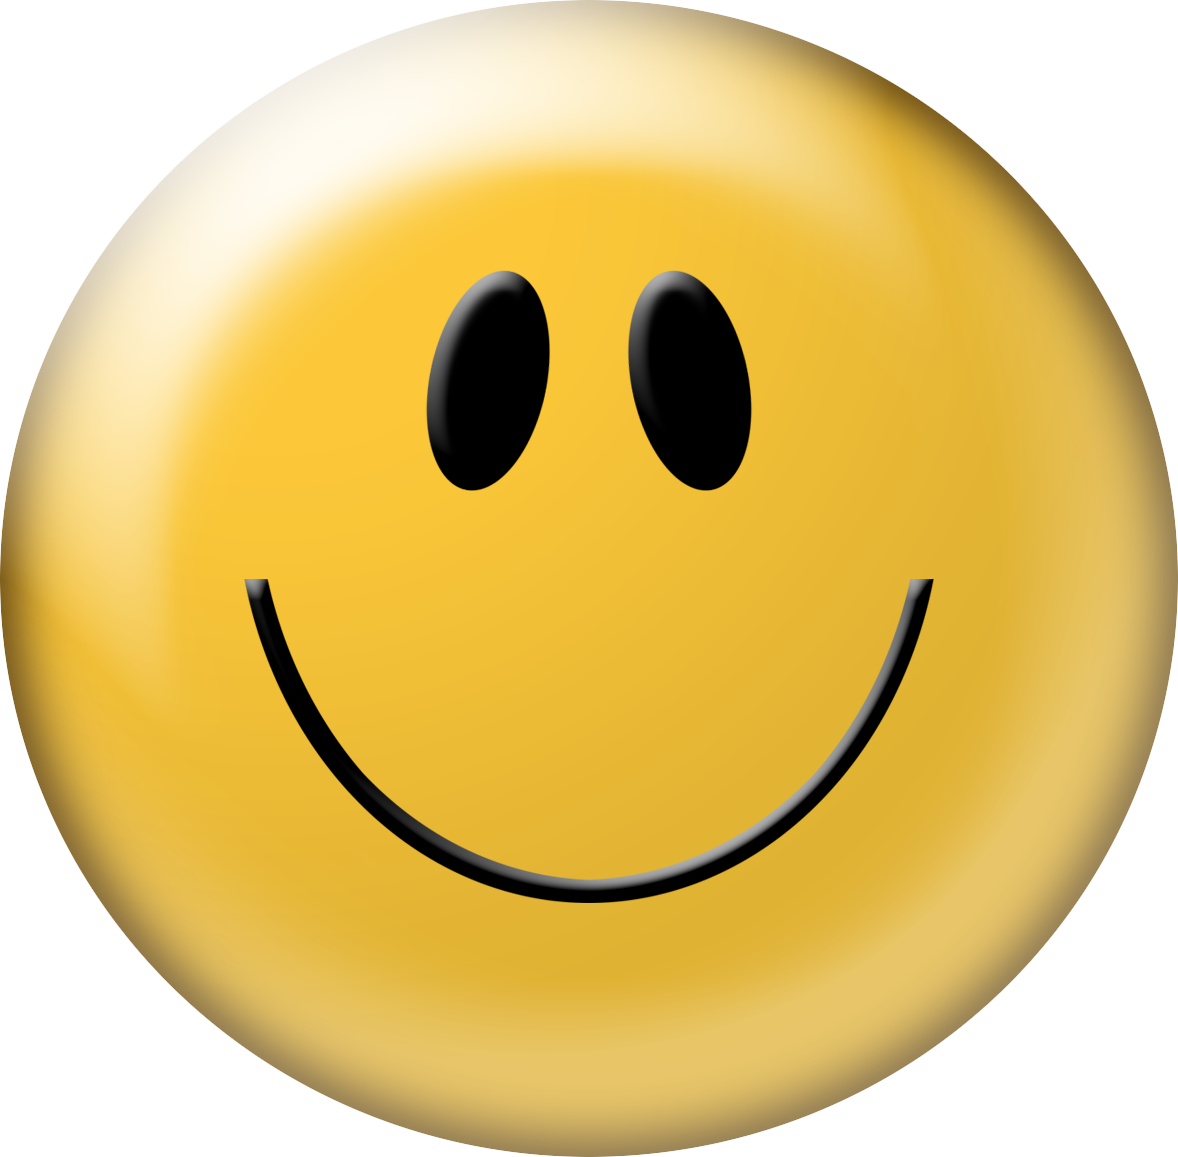 File:Emoticon Face Smiley GE - Wikimedia Commons